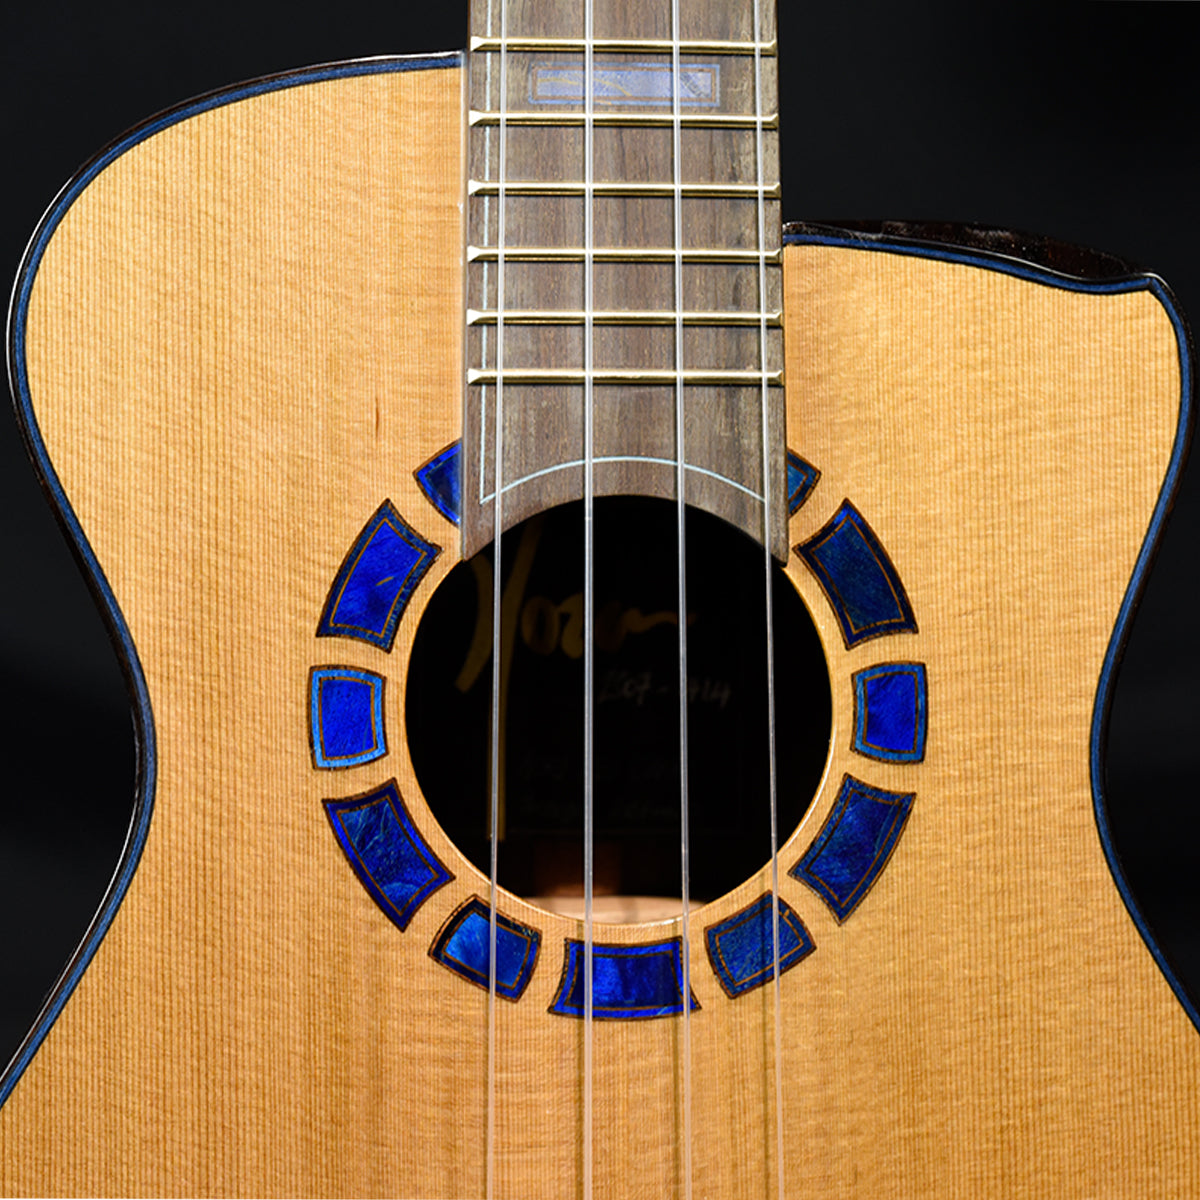 Green Label Tenor Red Cedar with Indian Rosewood (Blue)